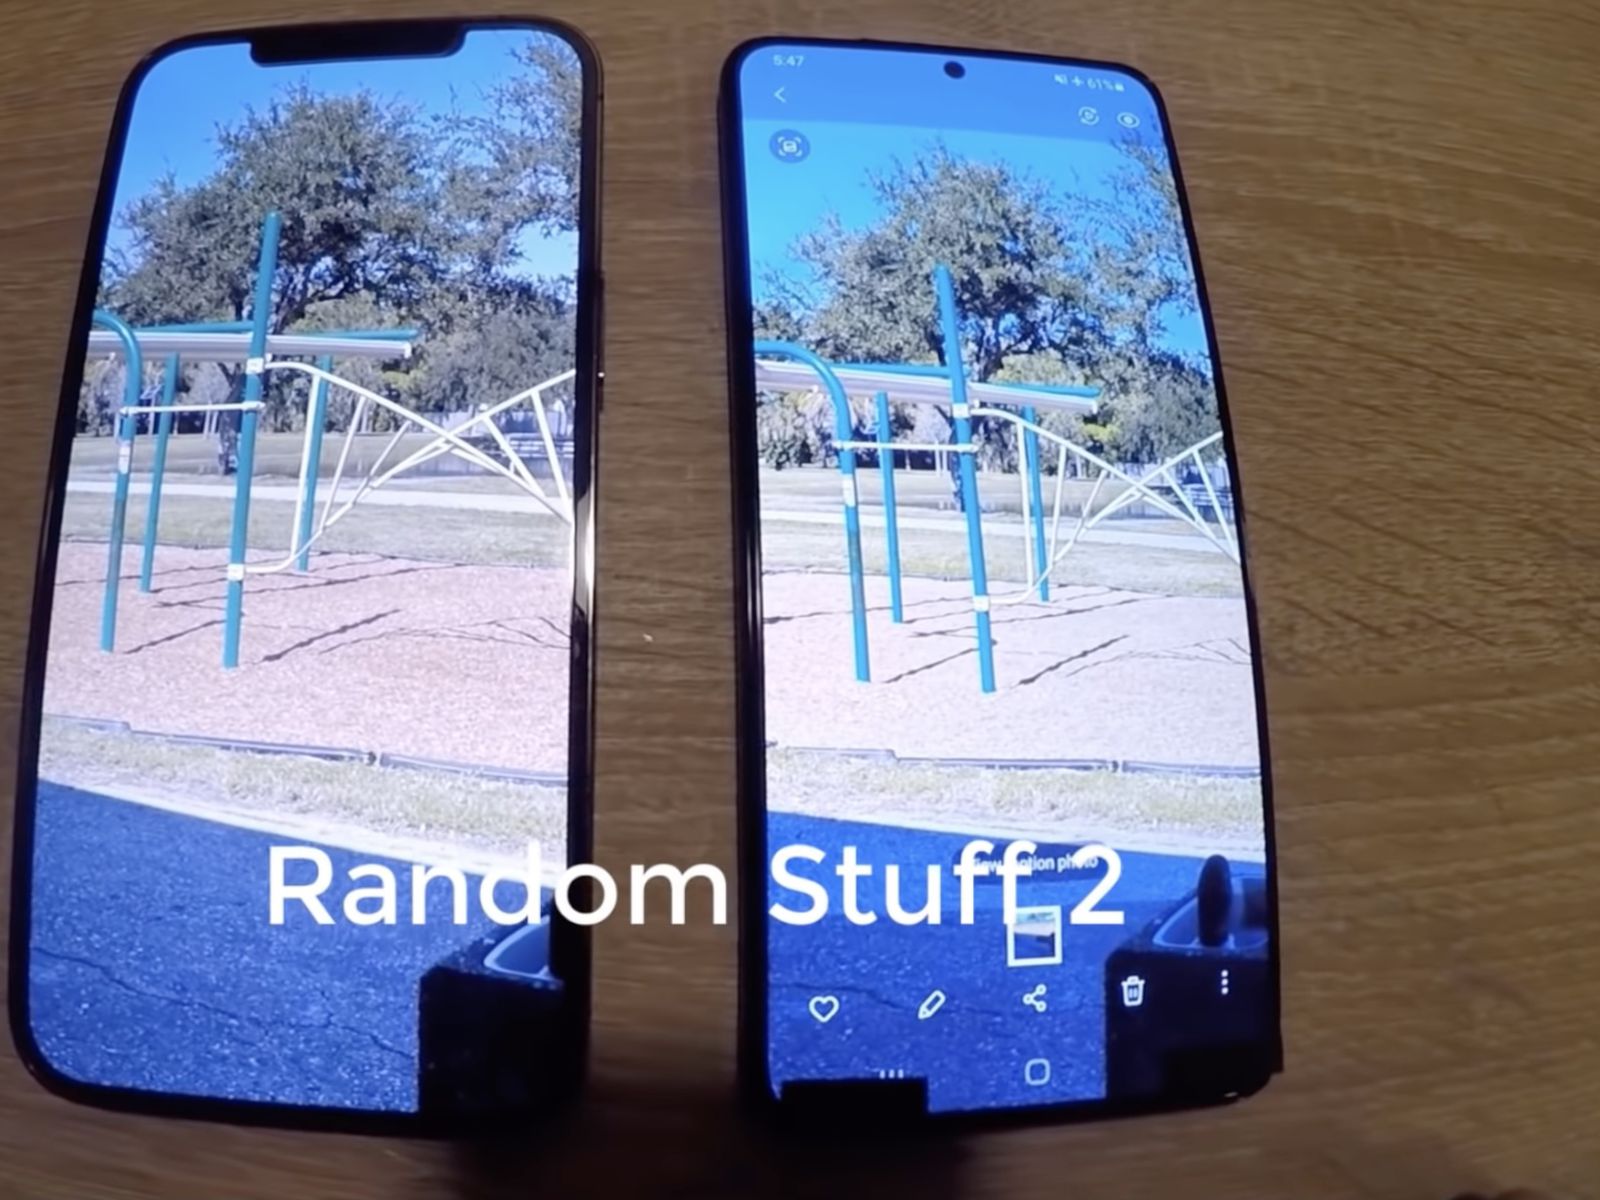 Hands On Video Compares Unreleased Samsung Galaxy S21 With Iphone 12 Pro Macrumors